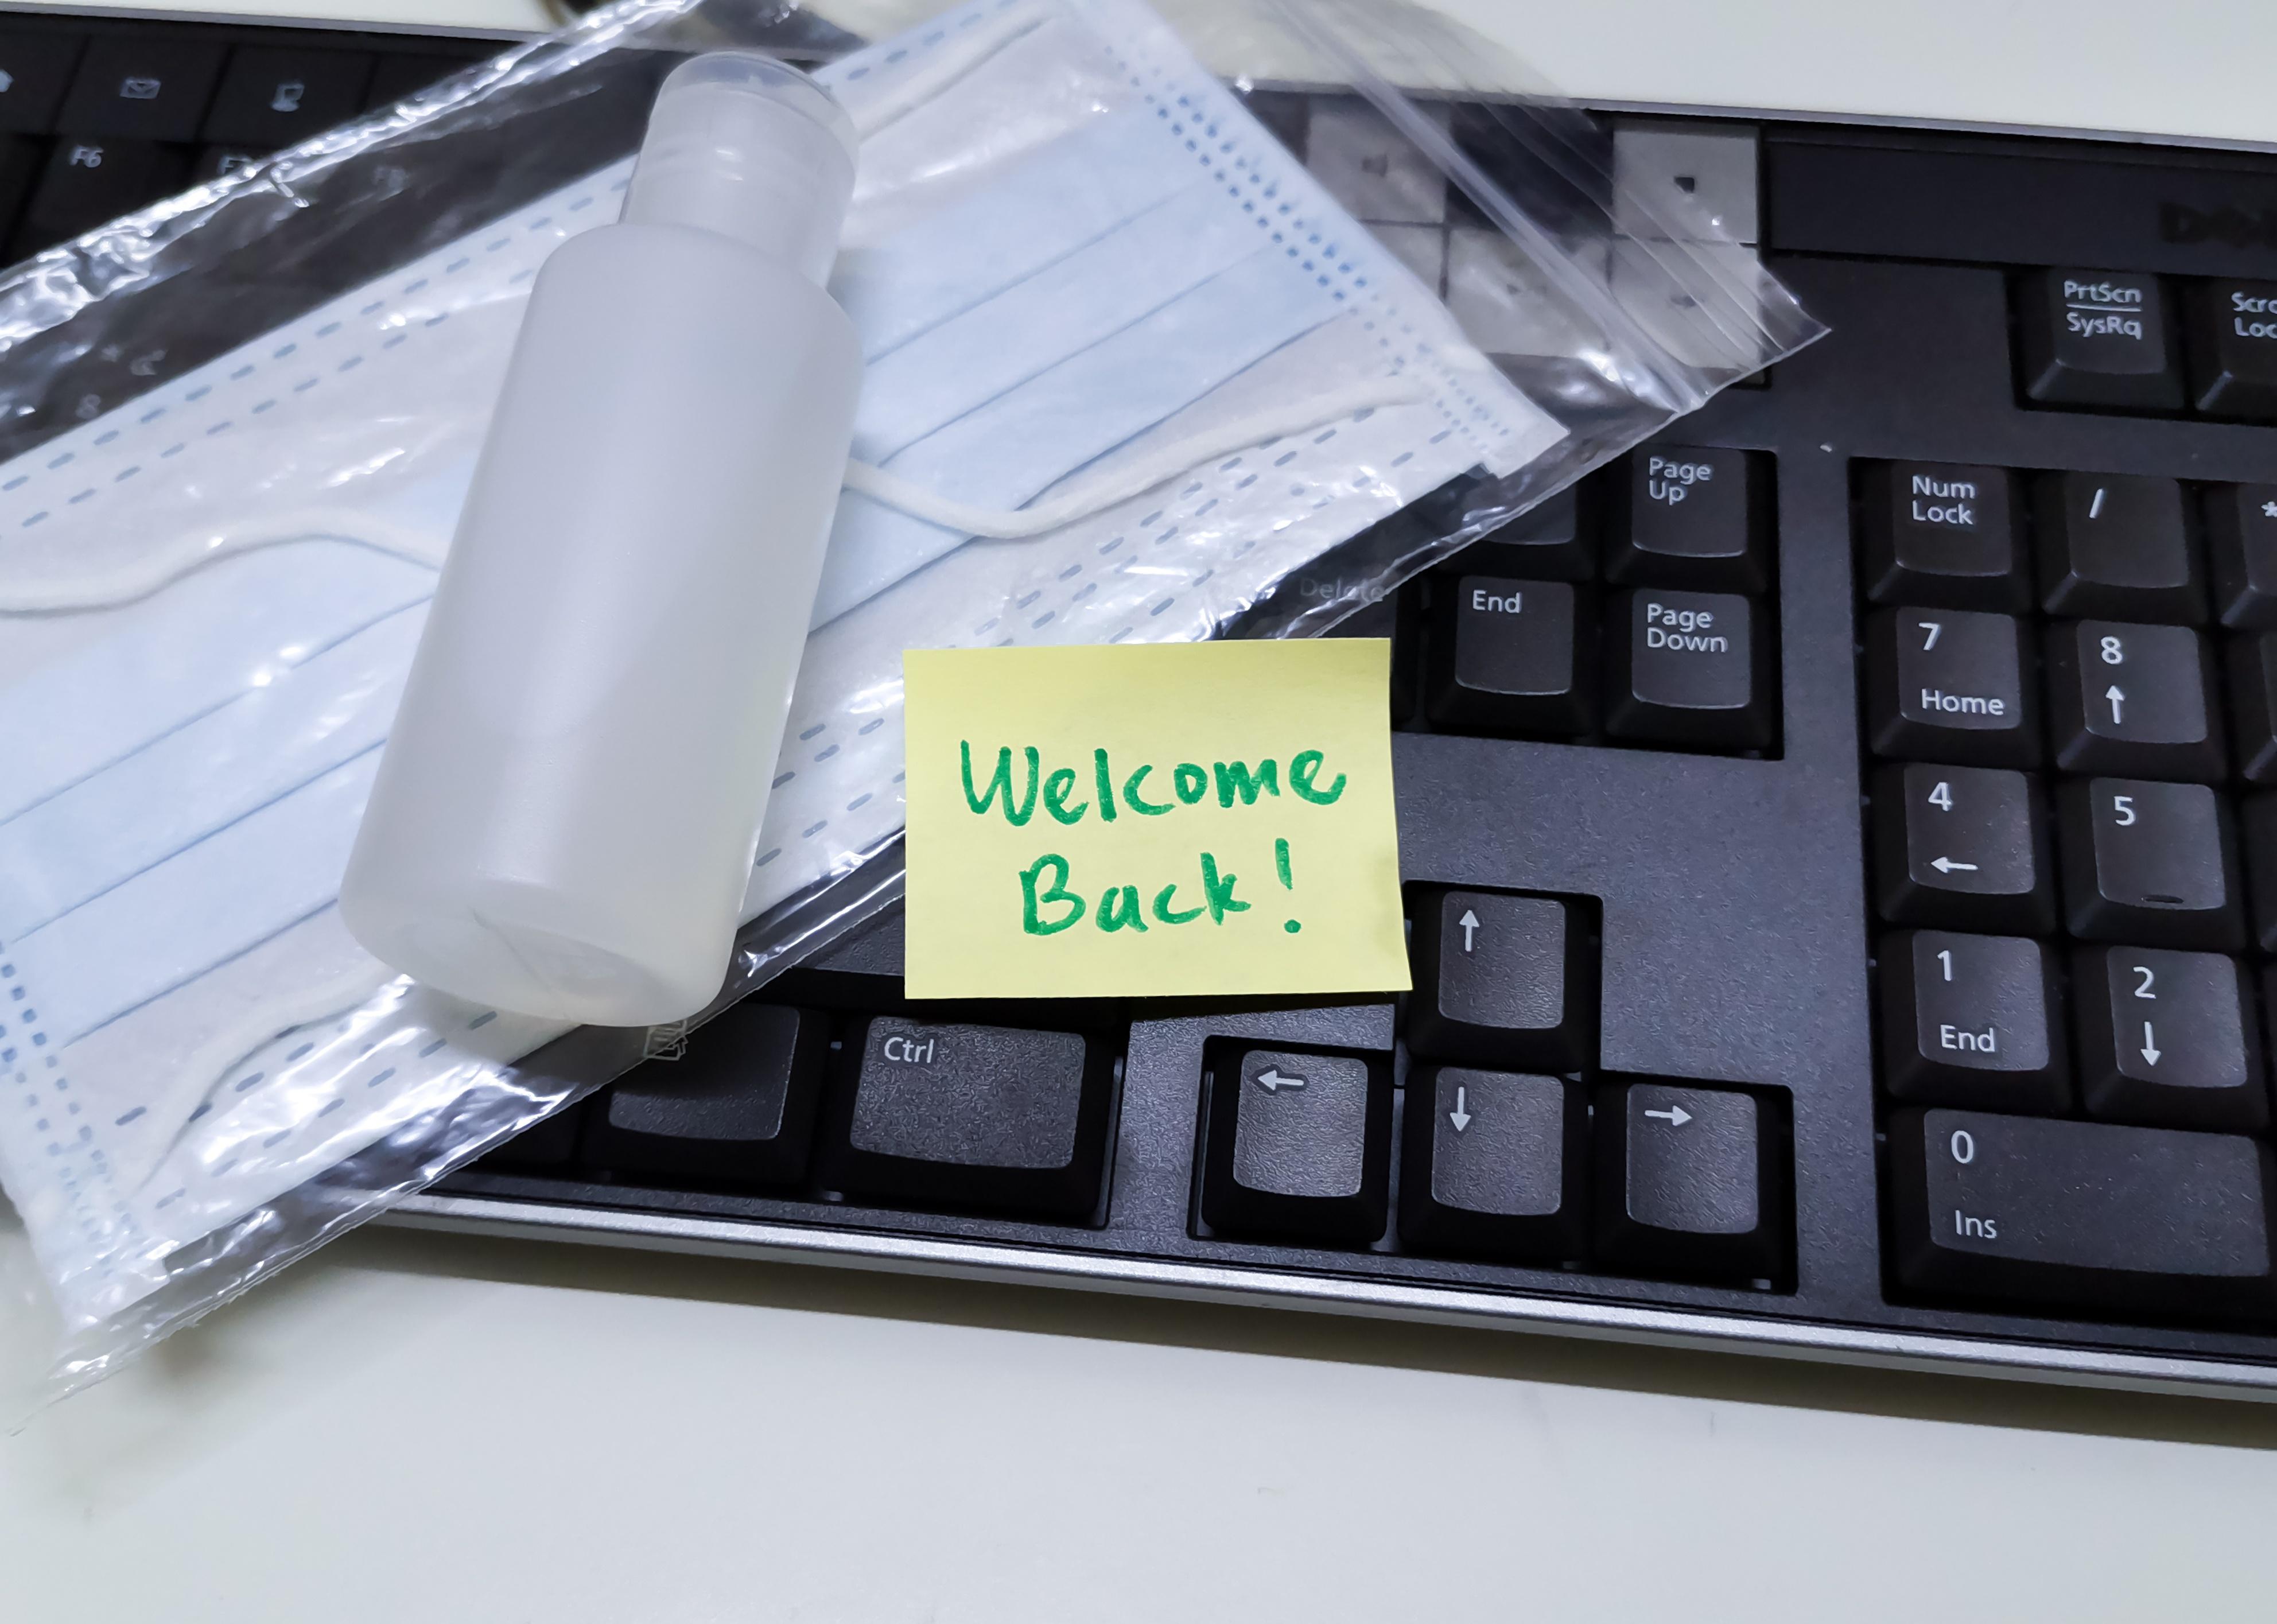 Welcome back note with hand sanitizer and mask on work keyboard.